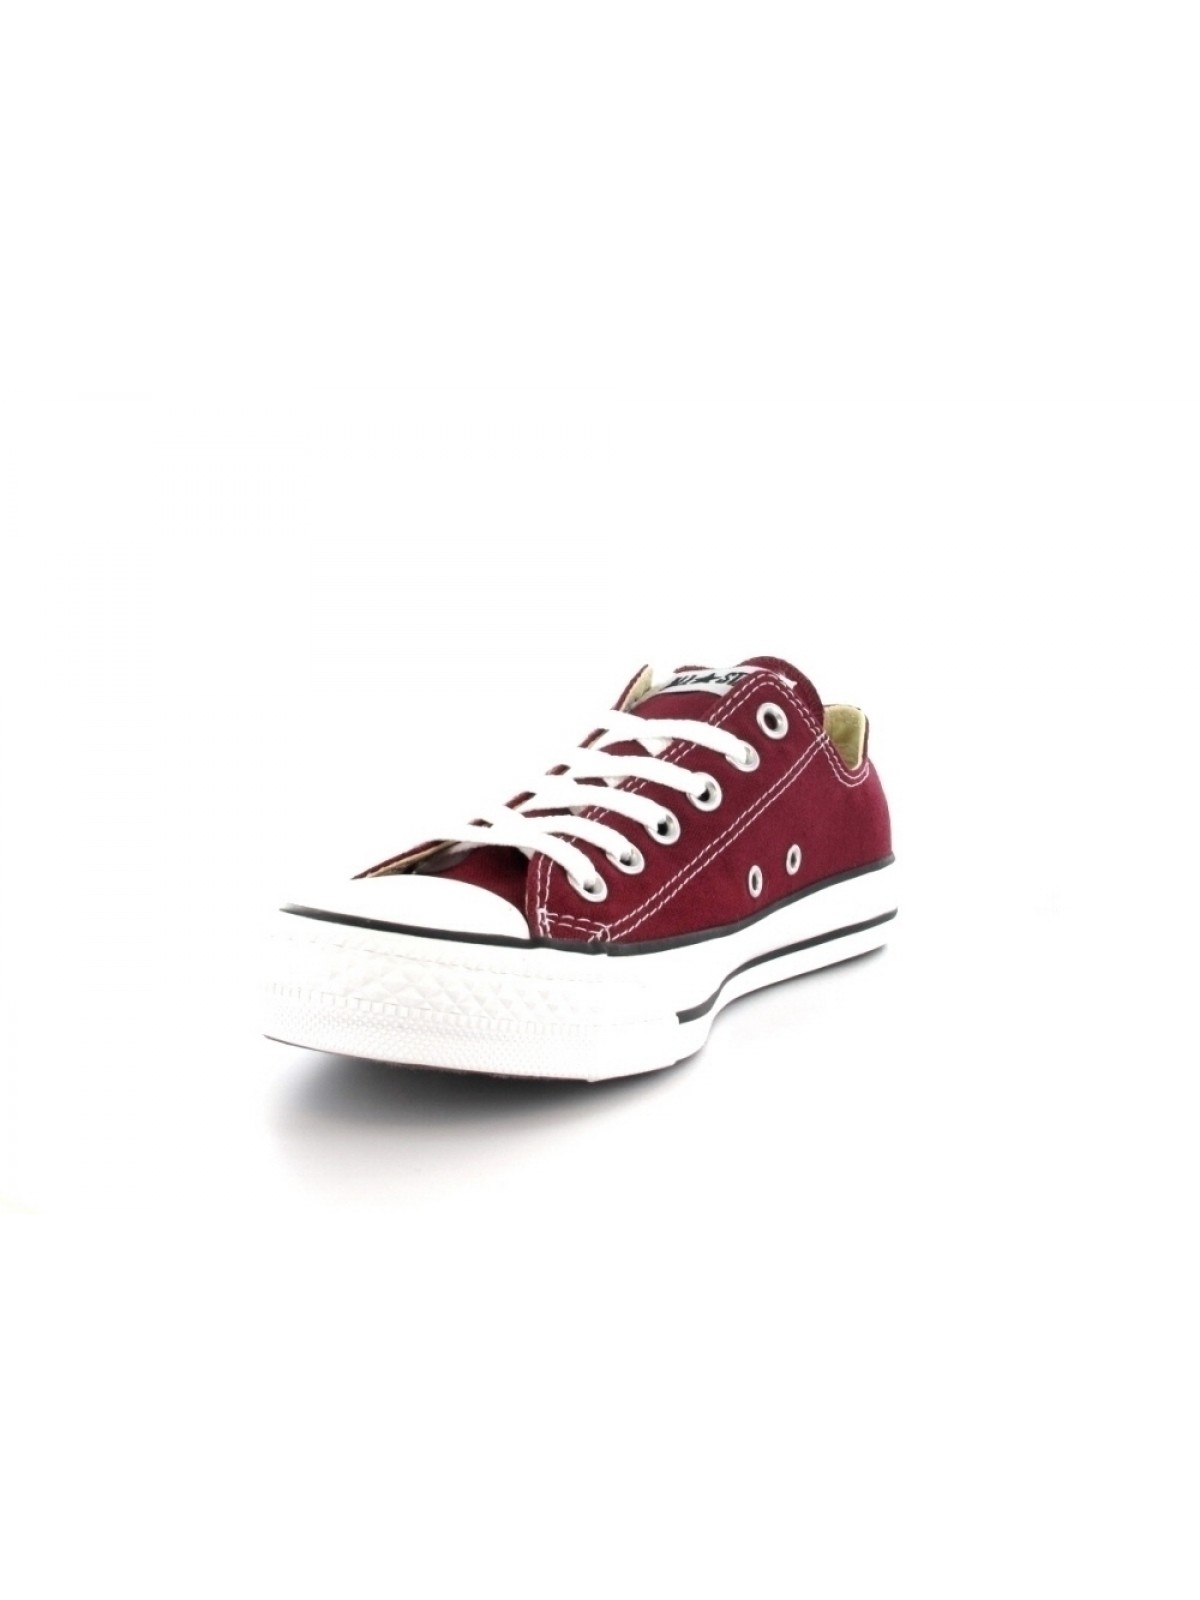 Converse Chuck Taylor all star toile basse bordeaux - Basse ...